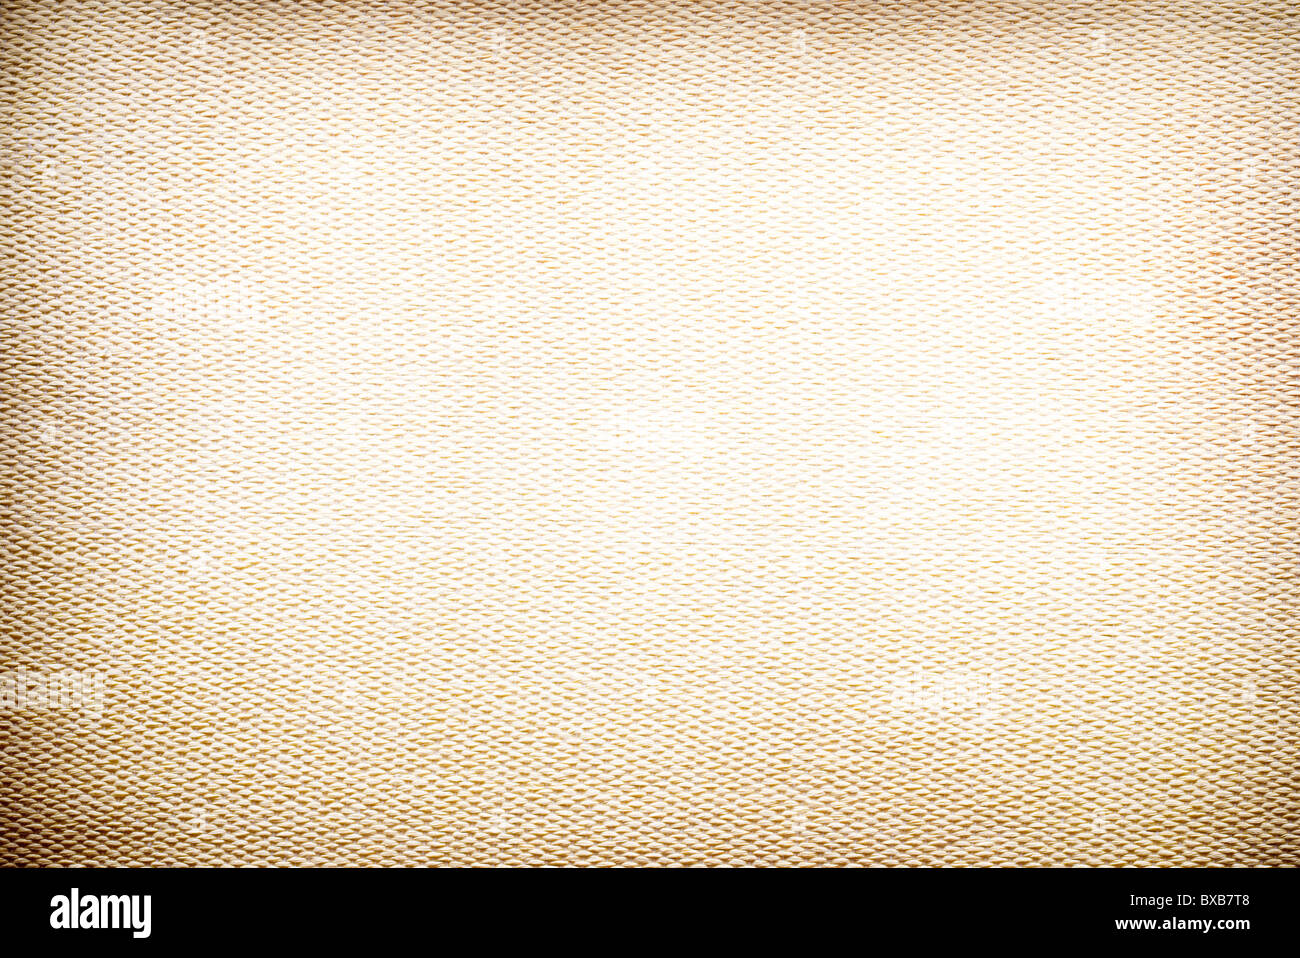 texture of the yellow fabric close up. Edges of the image blacked. Stock Photo